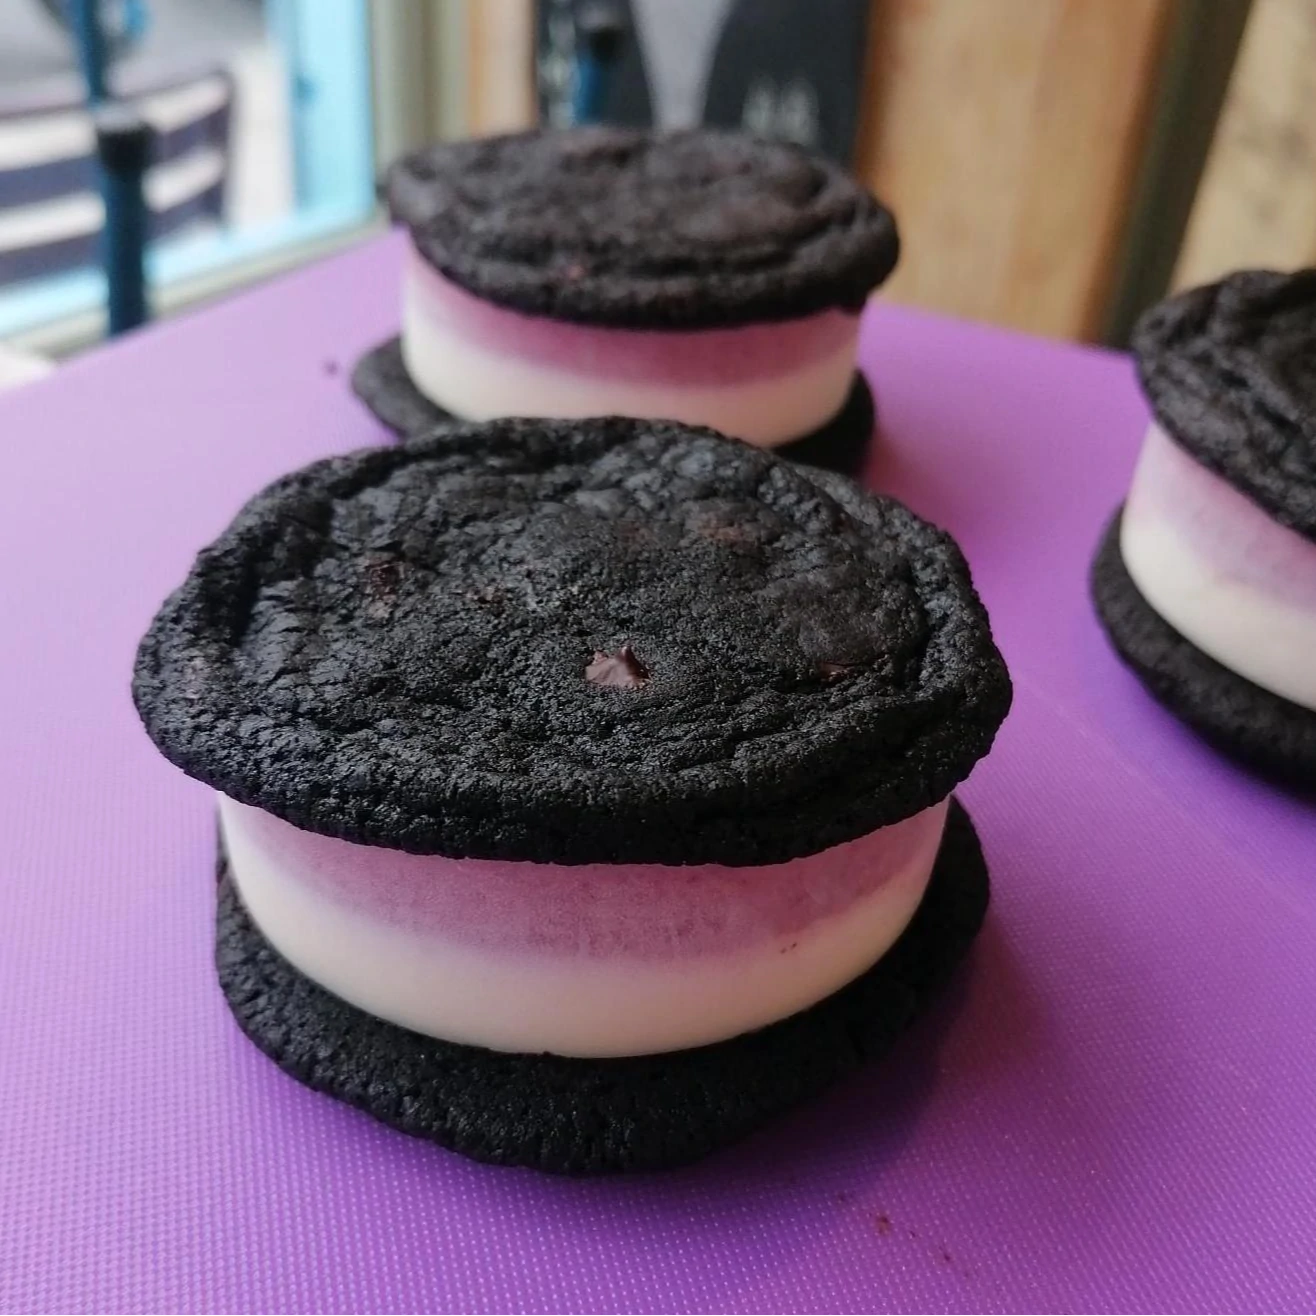 Two tone ice cream sandwich between two charcoal biscuits